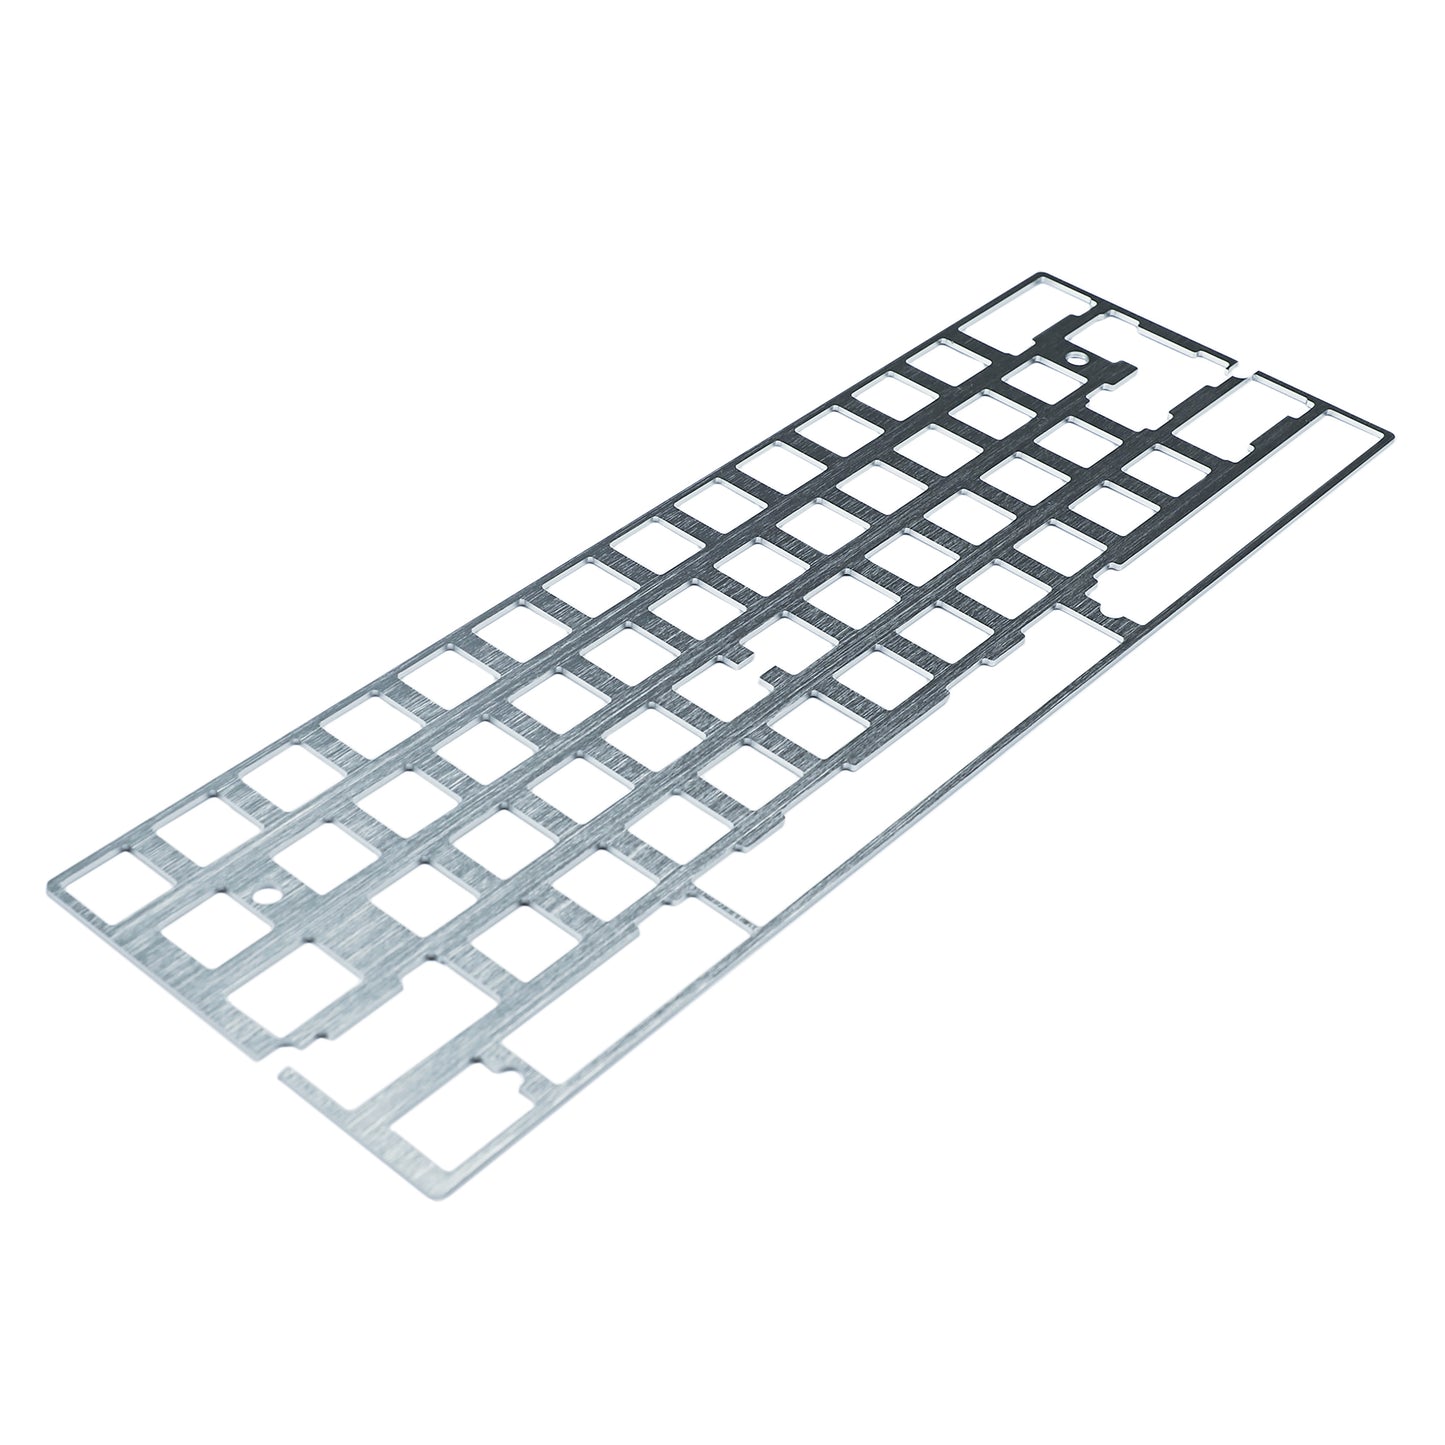 60% Aluminum/Brass/Steel Plate(DZ60 GH60 XD64 YD64MQ Using/Multi-Layout Supported)